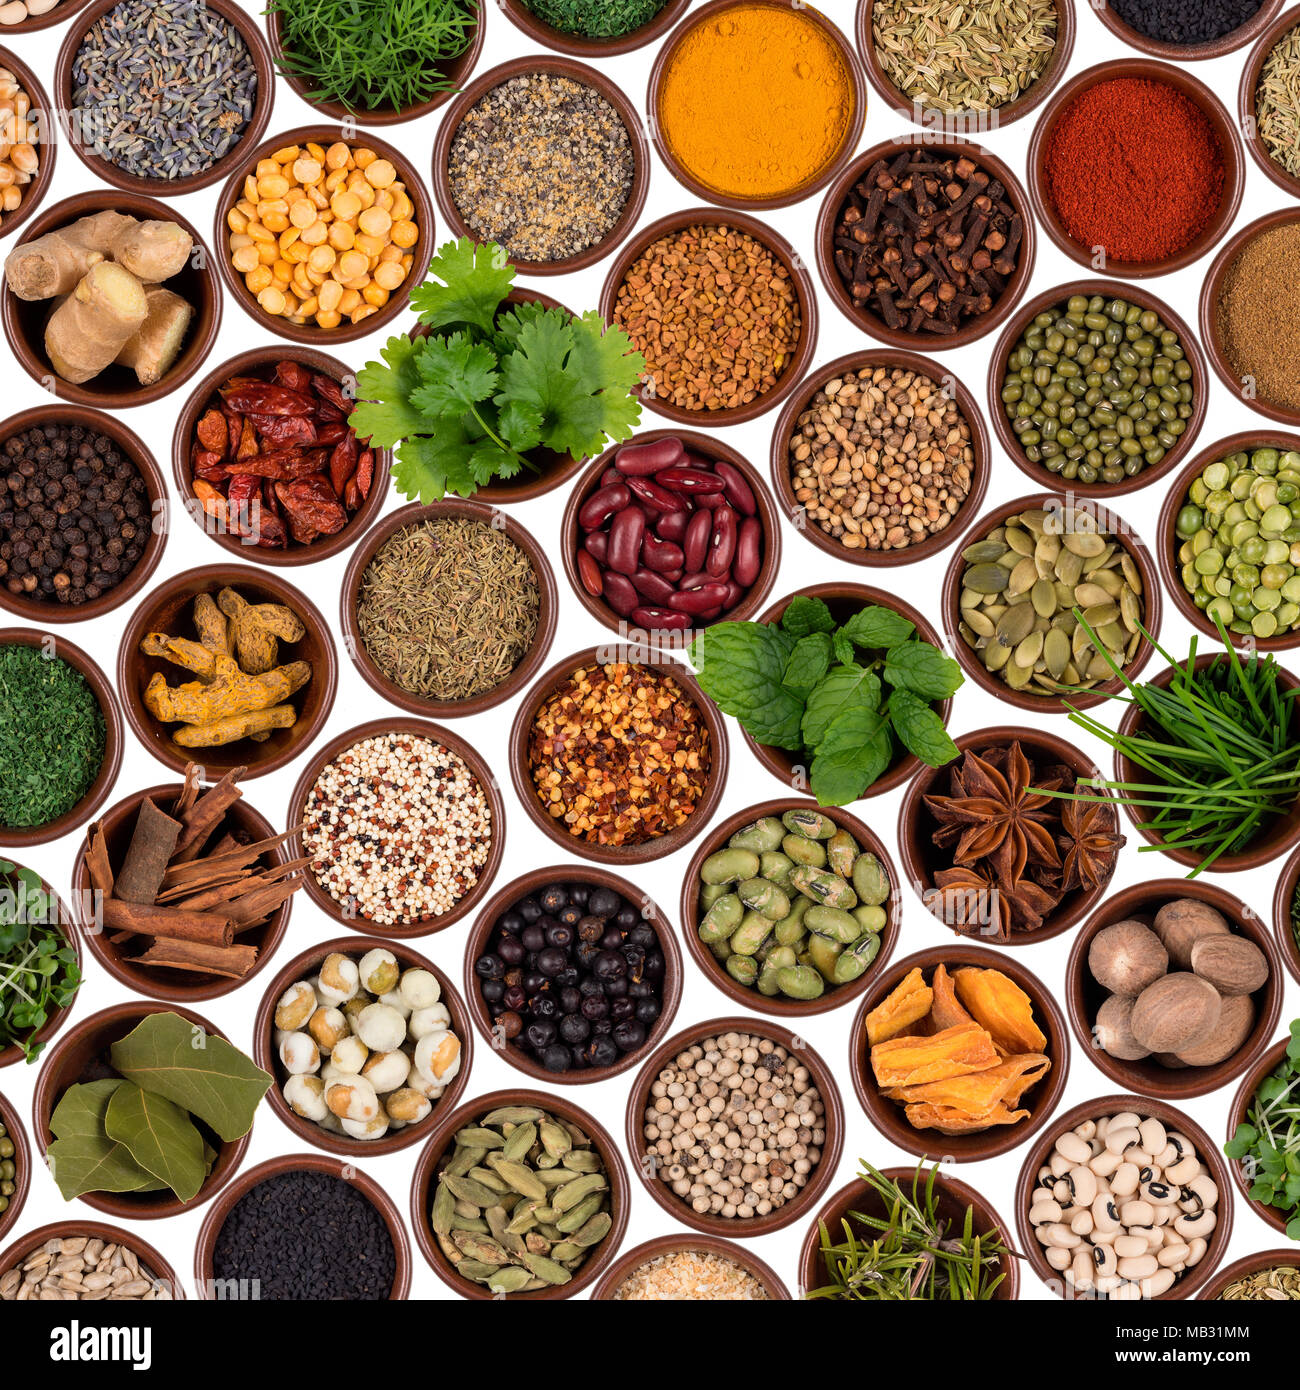 Selection of cooking ingredients to add flavor and seasoning. Stock Photo